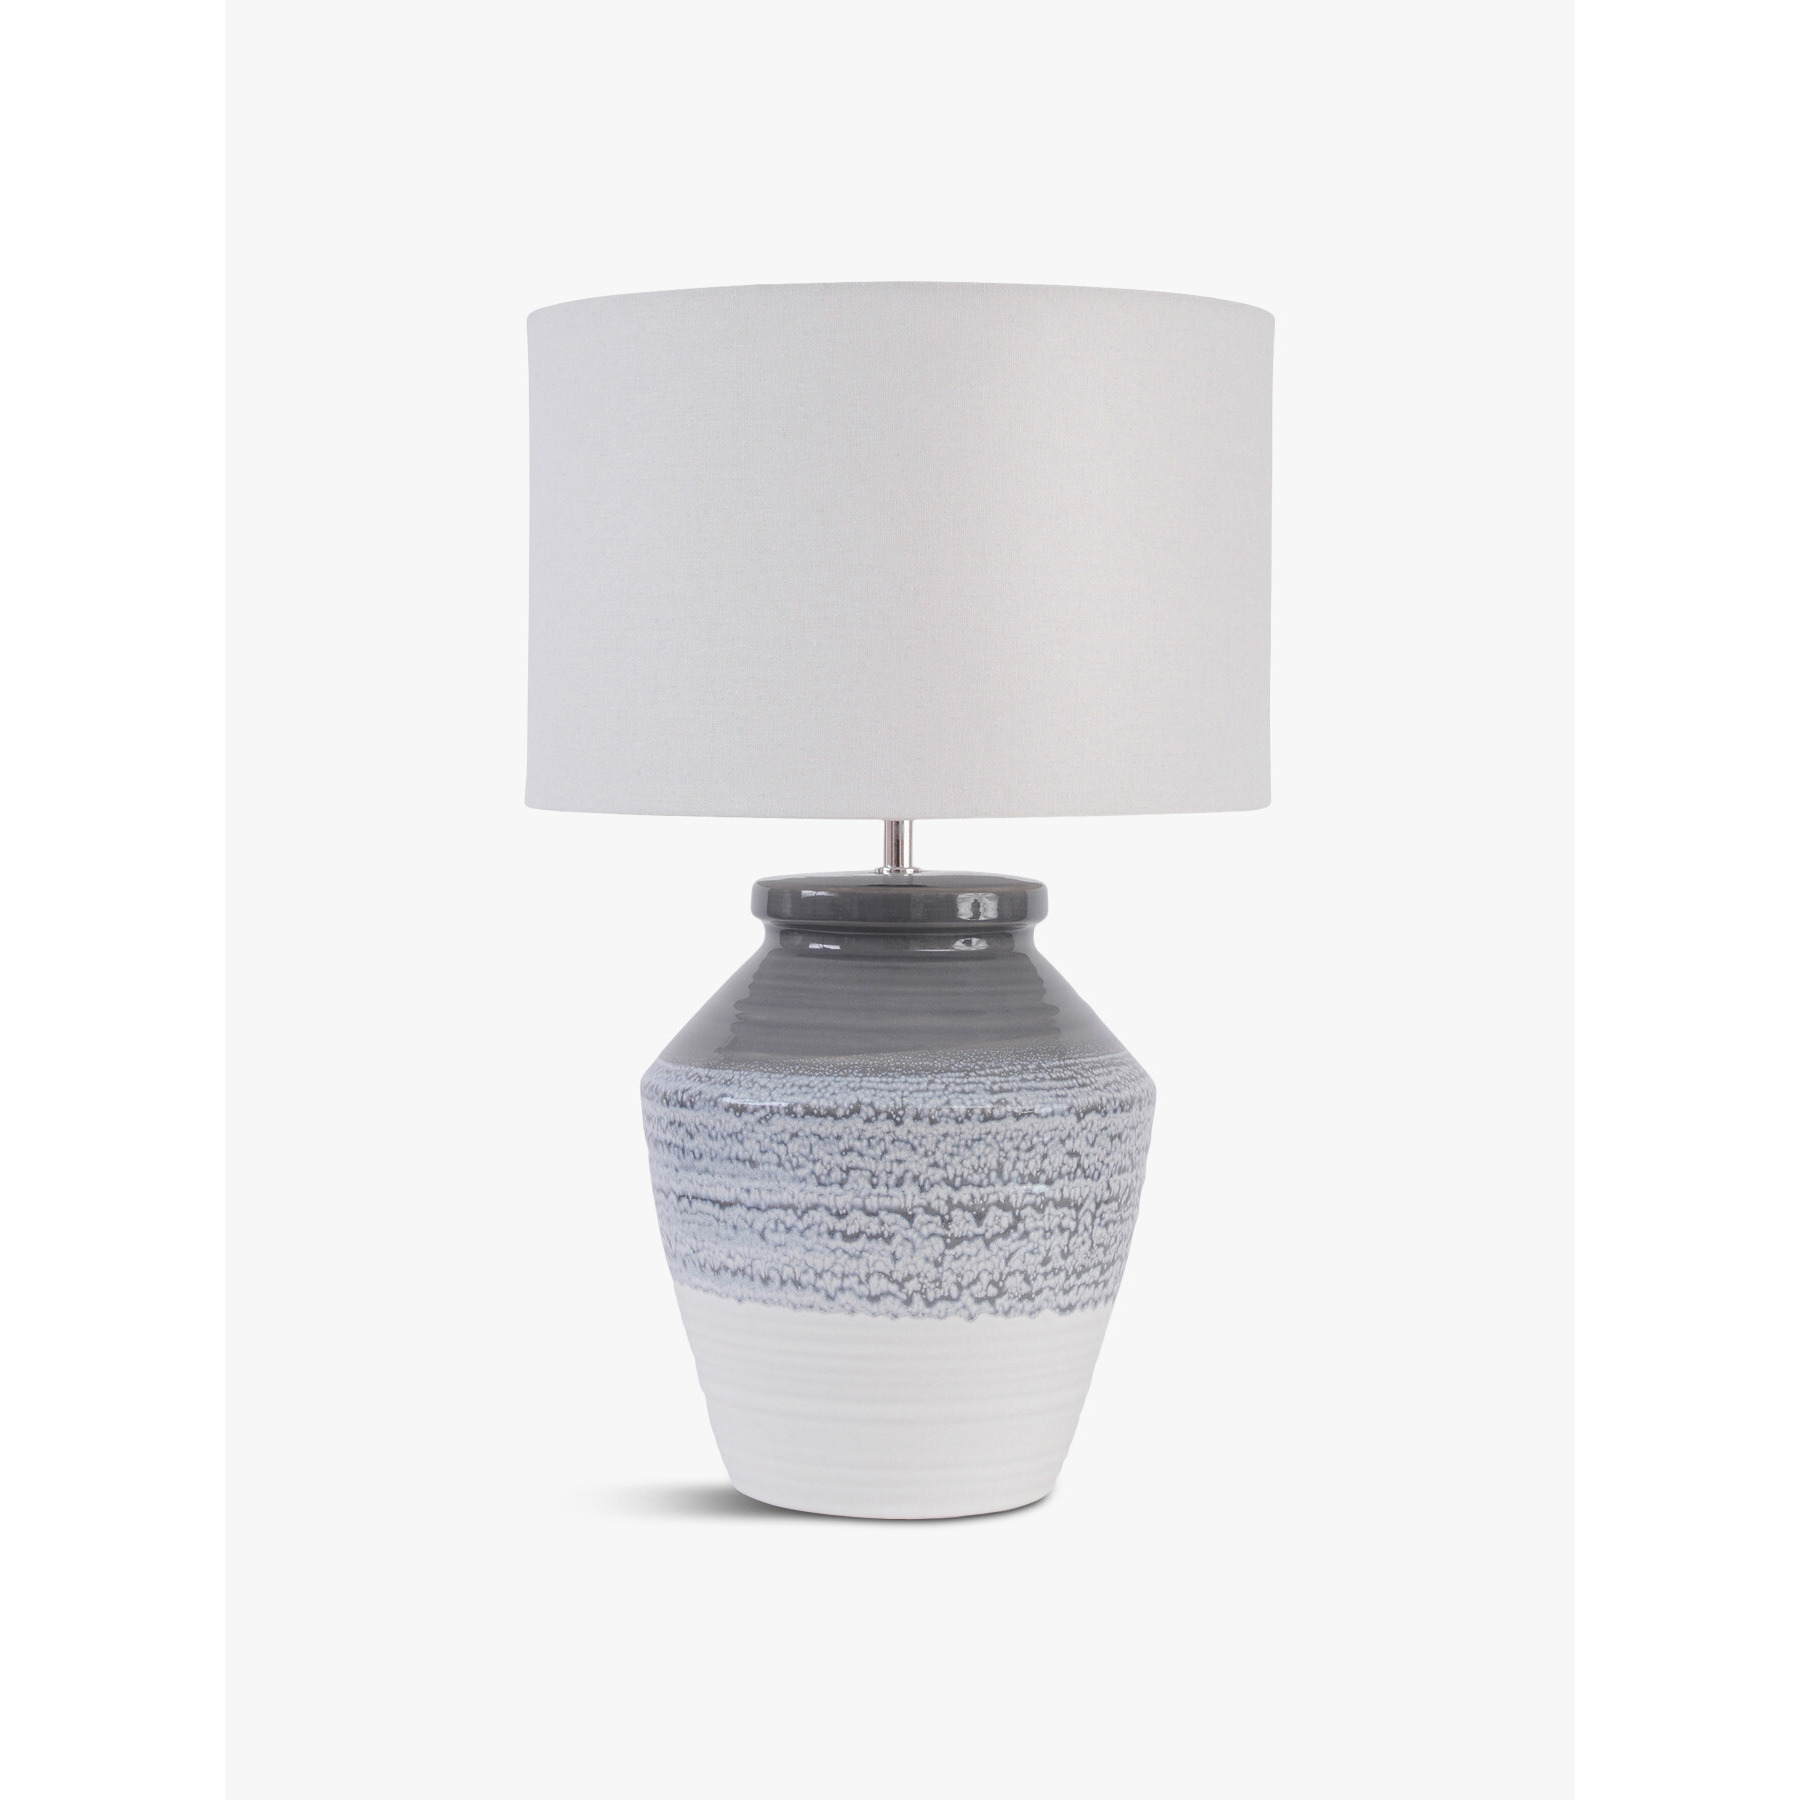 Libra Interiors Skyline Grey and Blue Ceramic Table Lamp with Shade - image 1